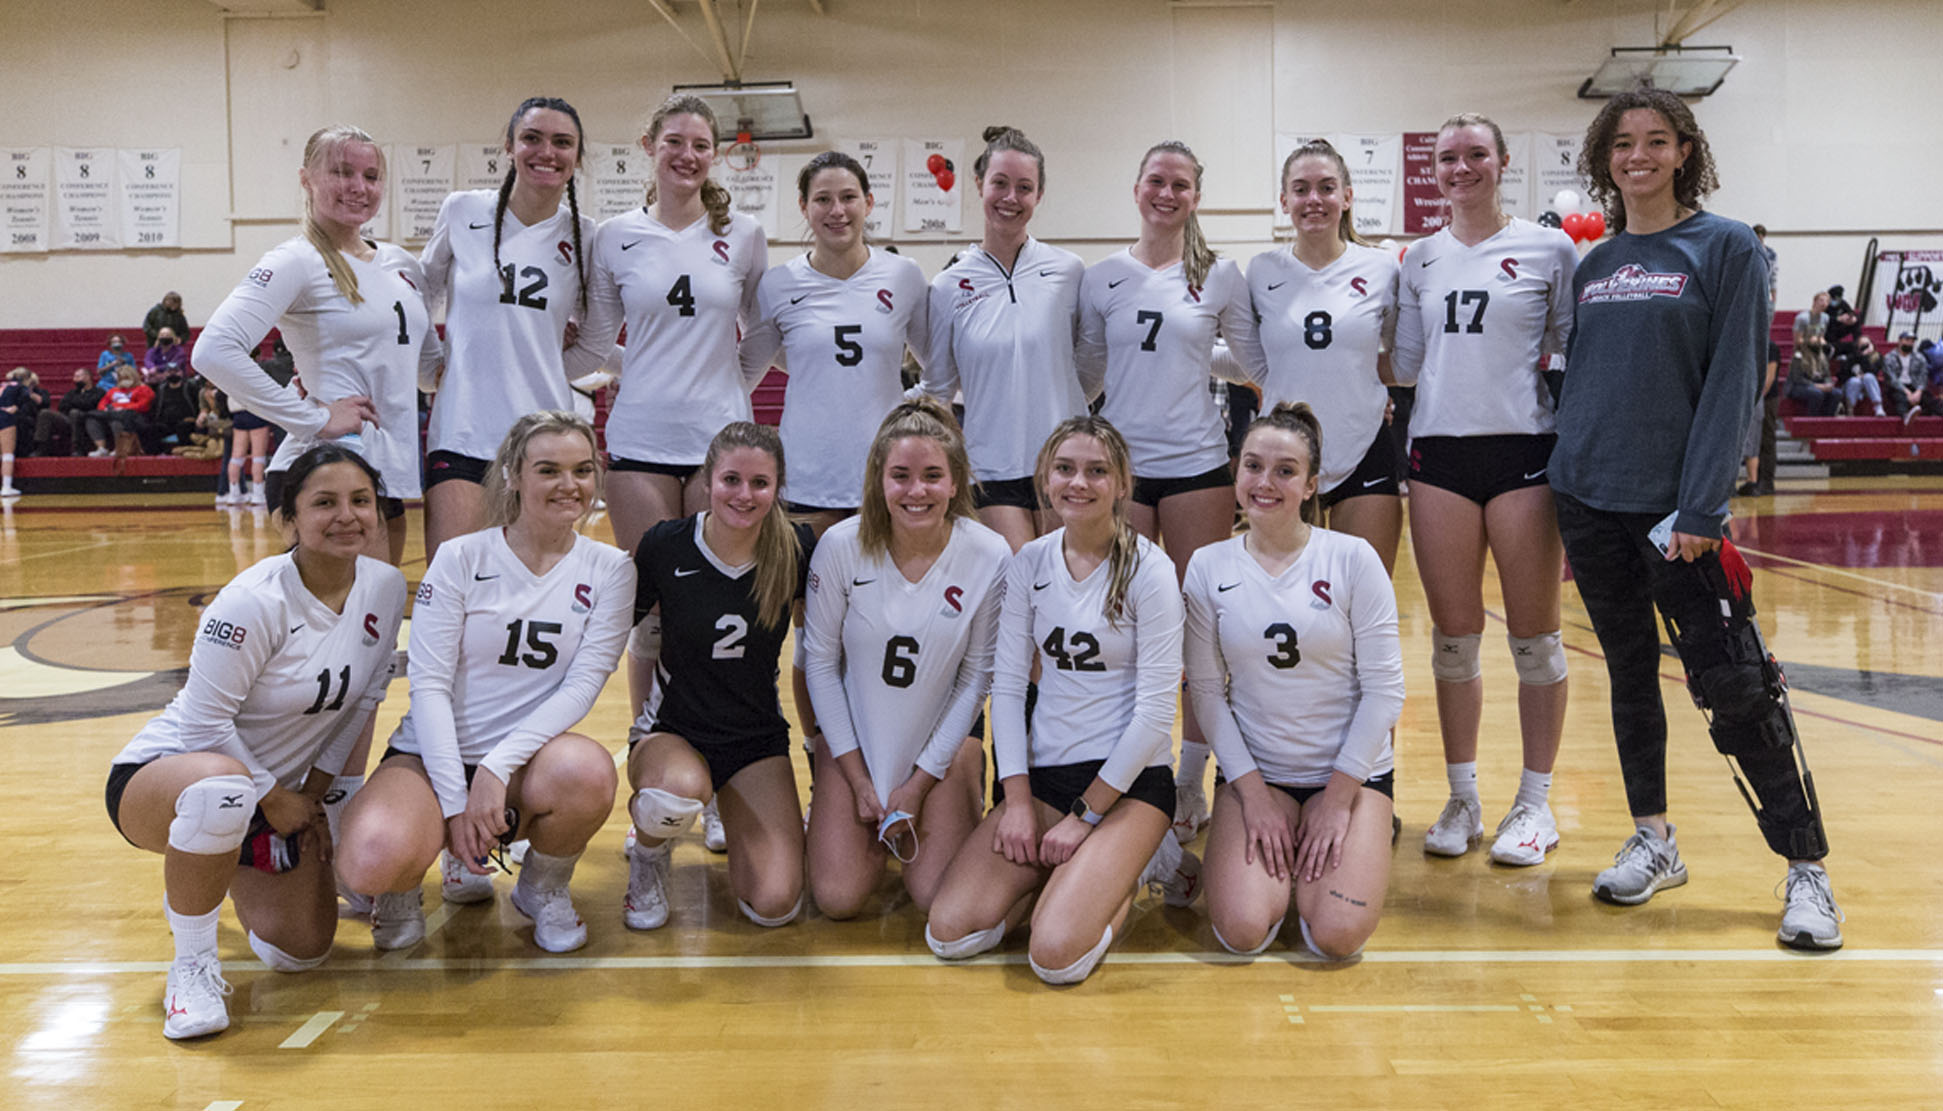 Sierra Volleyball Undefeated in League to Win 5th Straight Big 8 Title